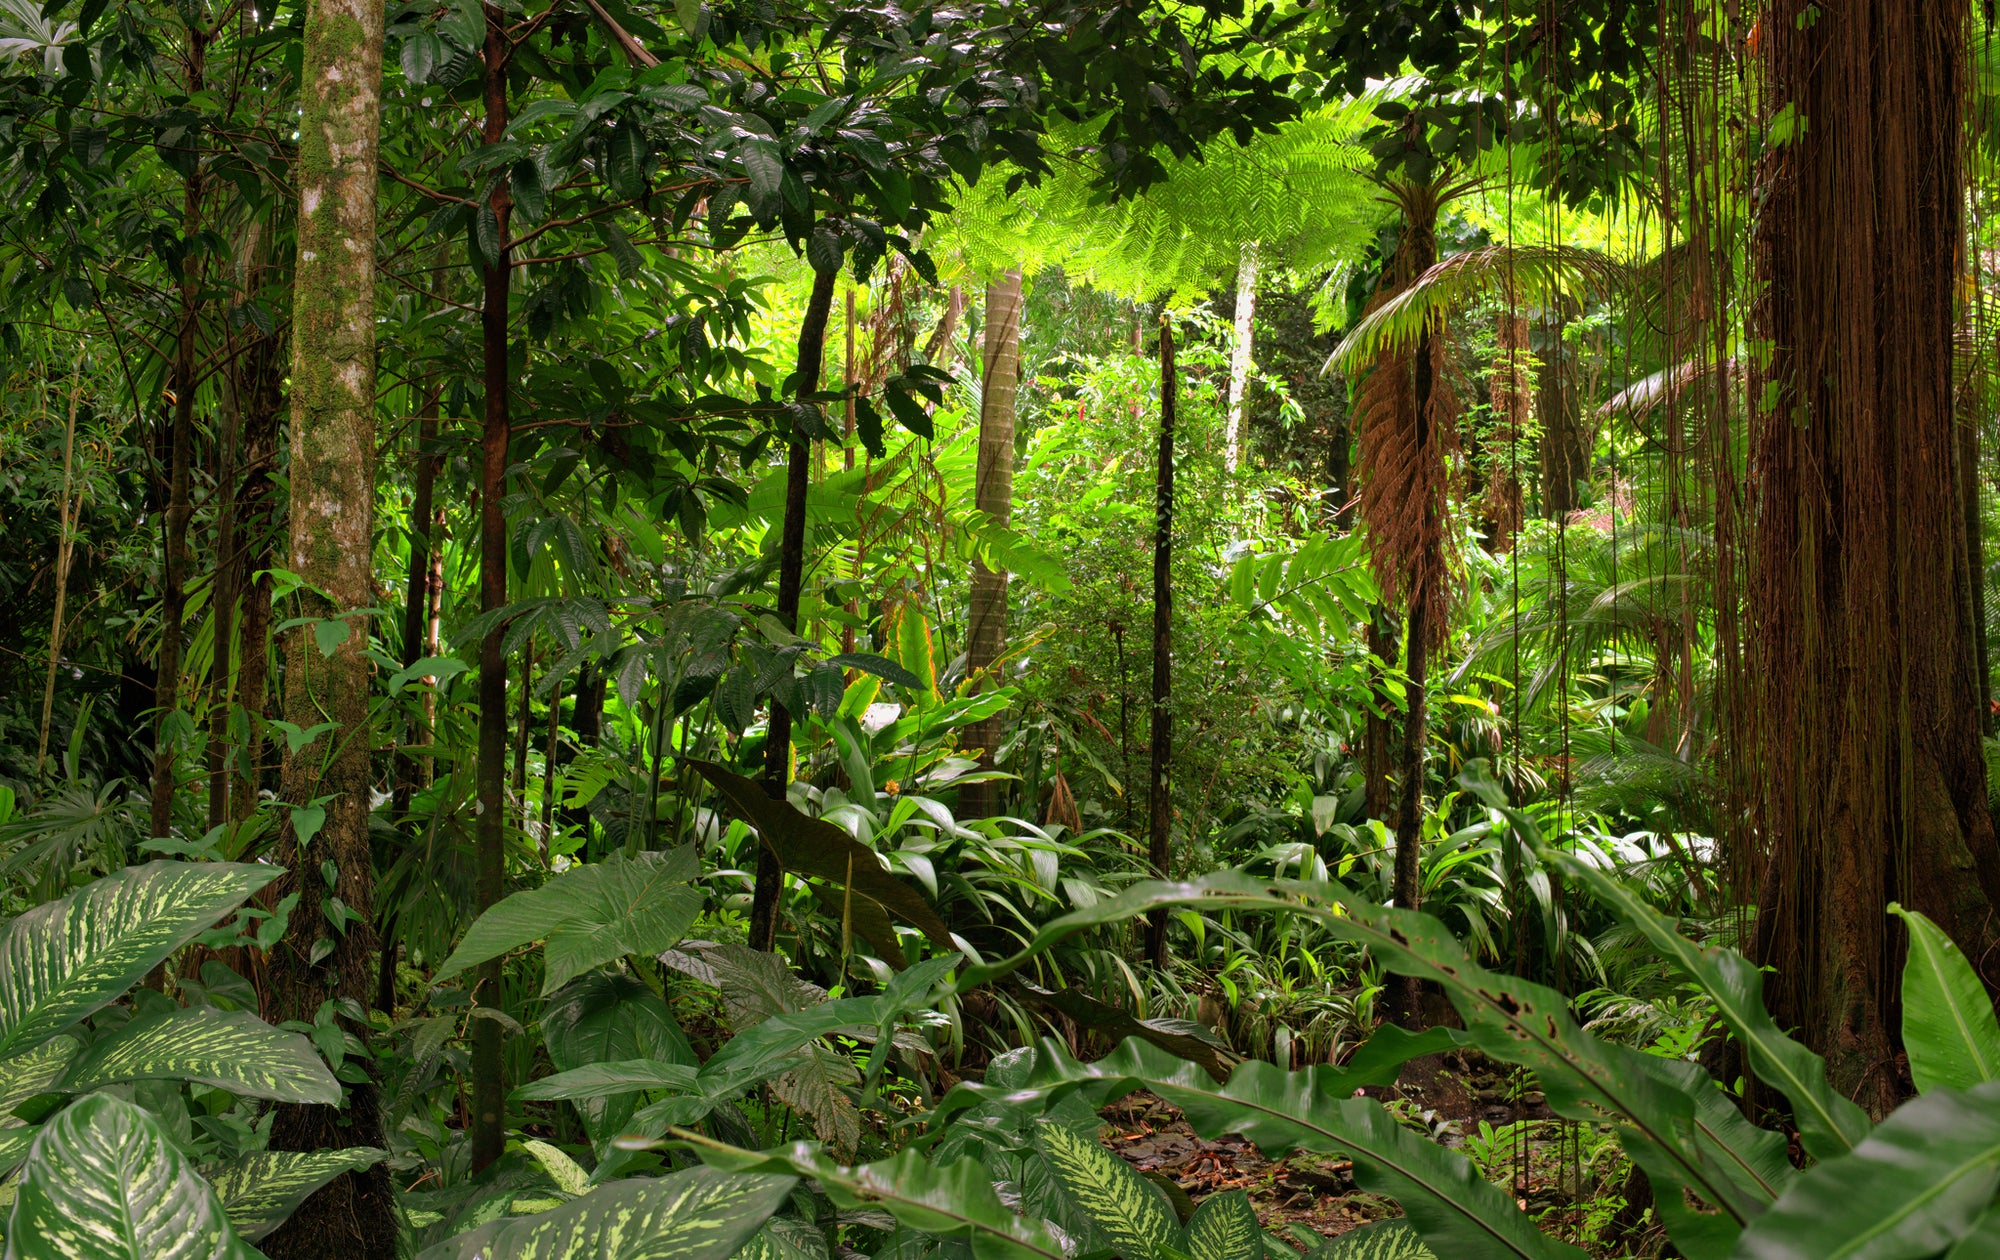 rainforest scene with tall ancient trees luscious green leaves and tropical plants covering the floor and canopy